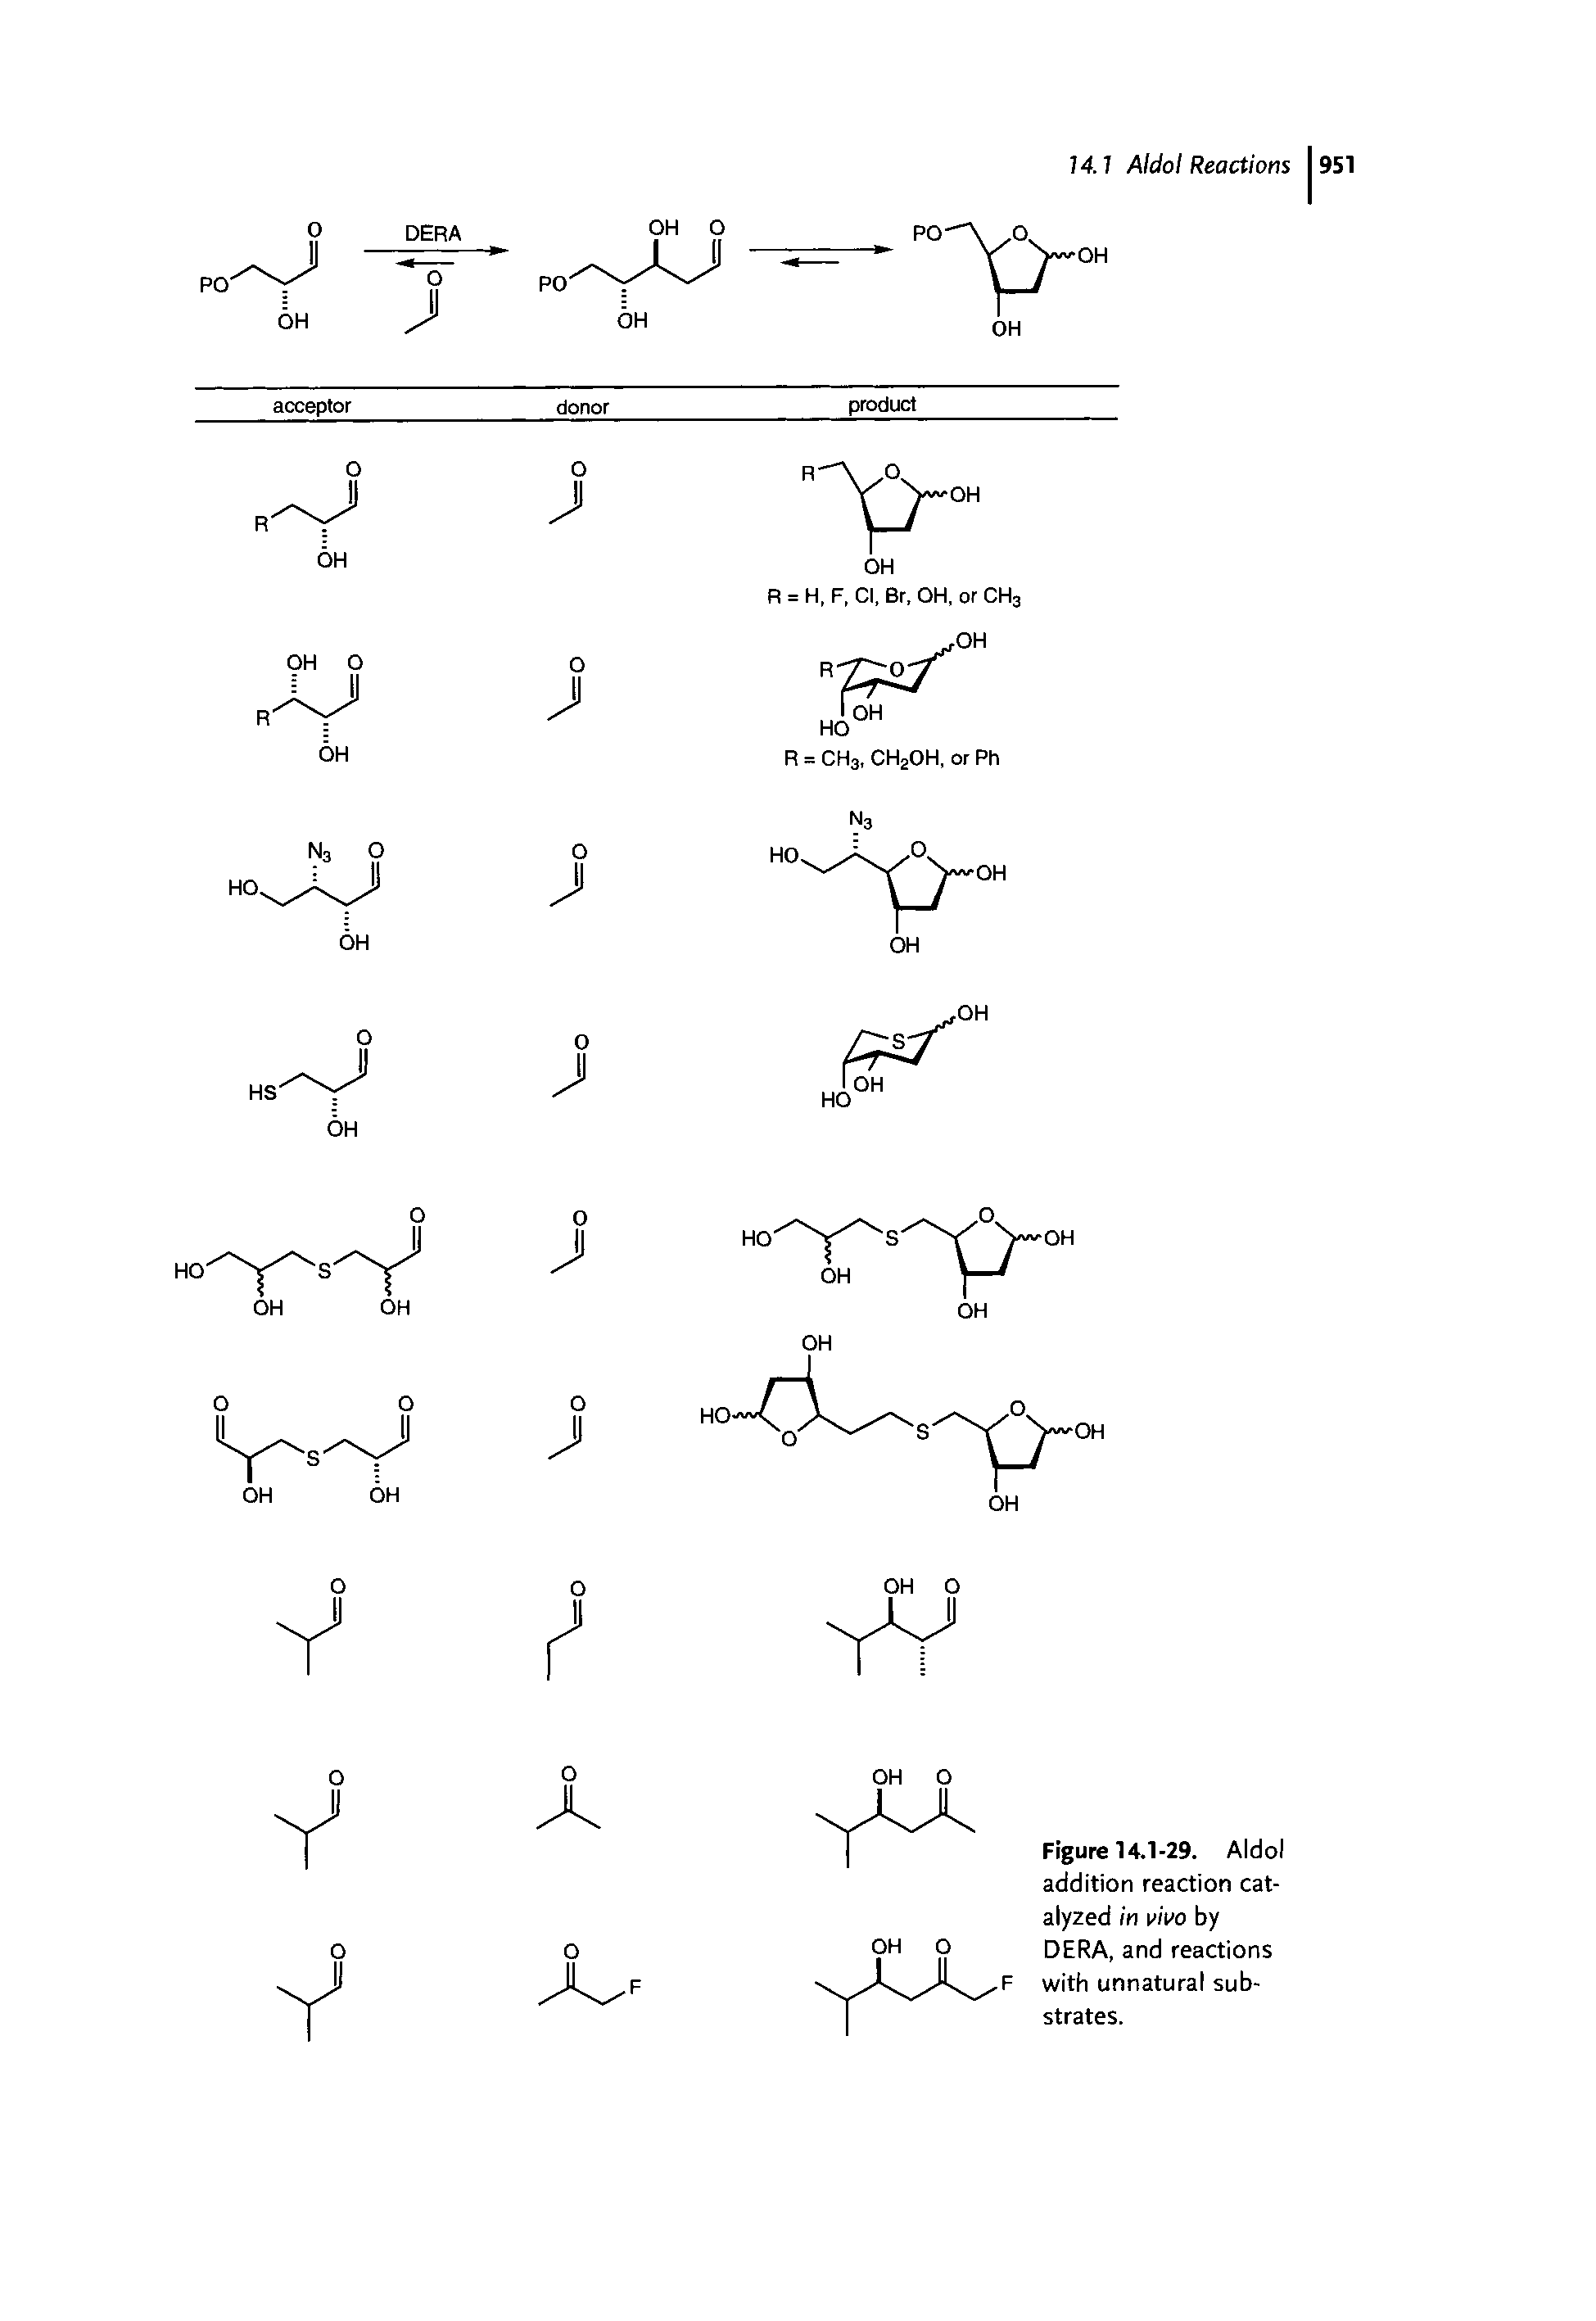 Figure 14.1-29. Aldol addition reaction catalyzed in iwo by DERA, and reactions F with unnatural sub-...